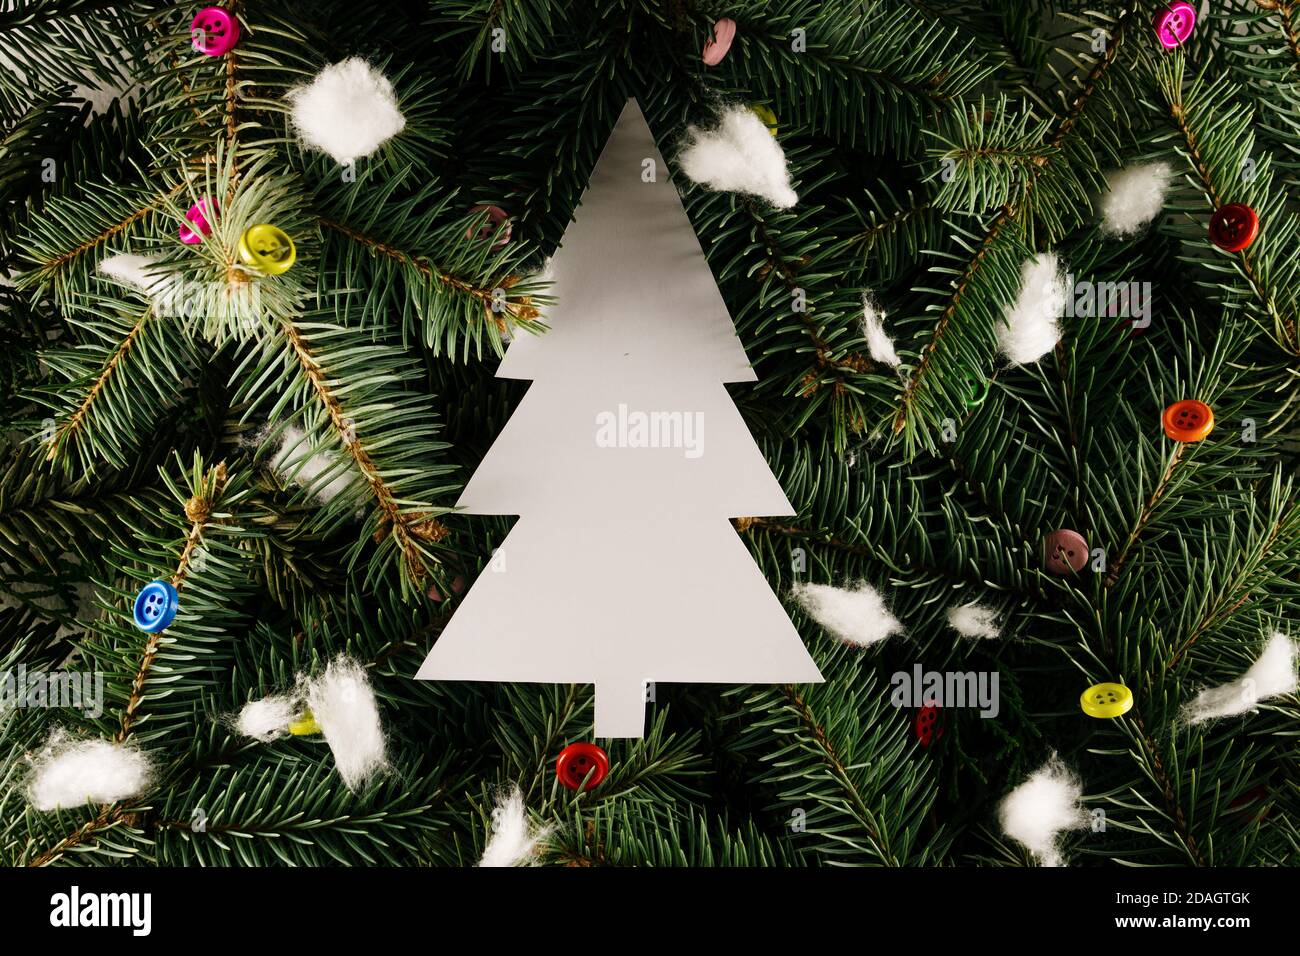 Layout made of Christmas tree branches with colorful buttons and foam snow. Nature New Year concept. Stock Photo